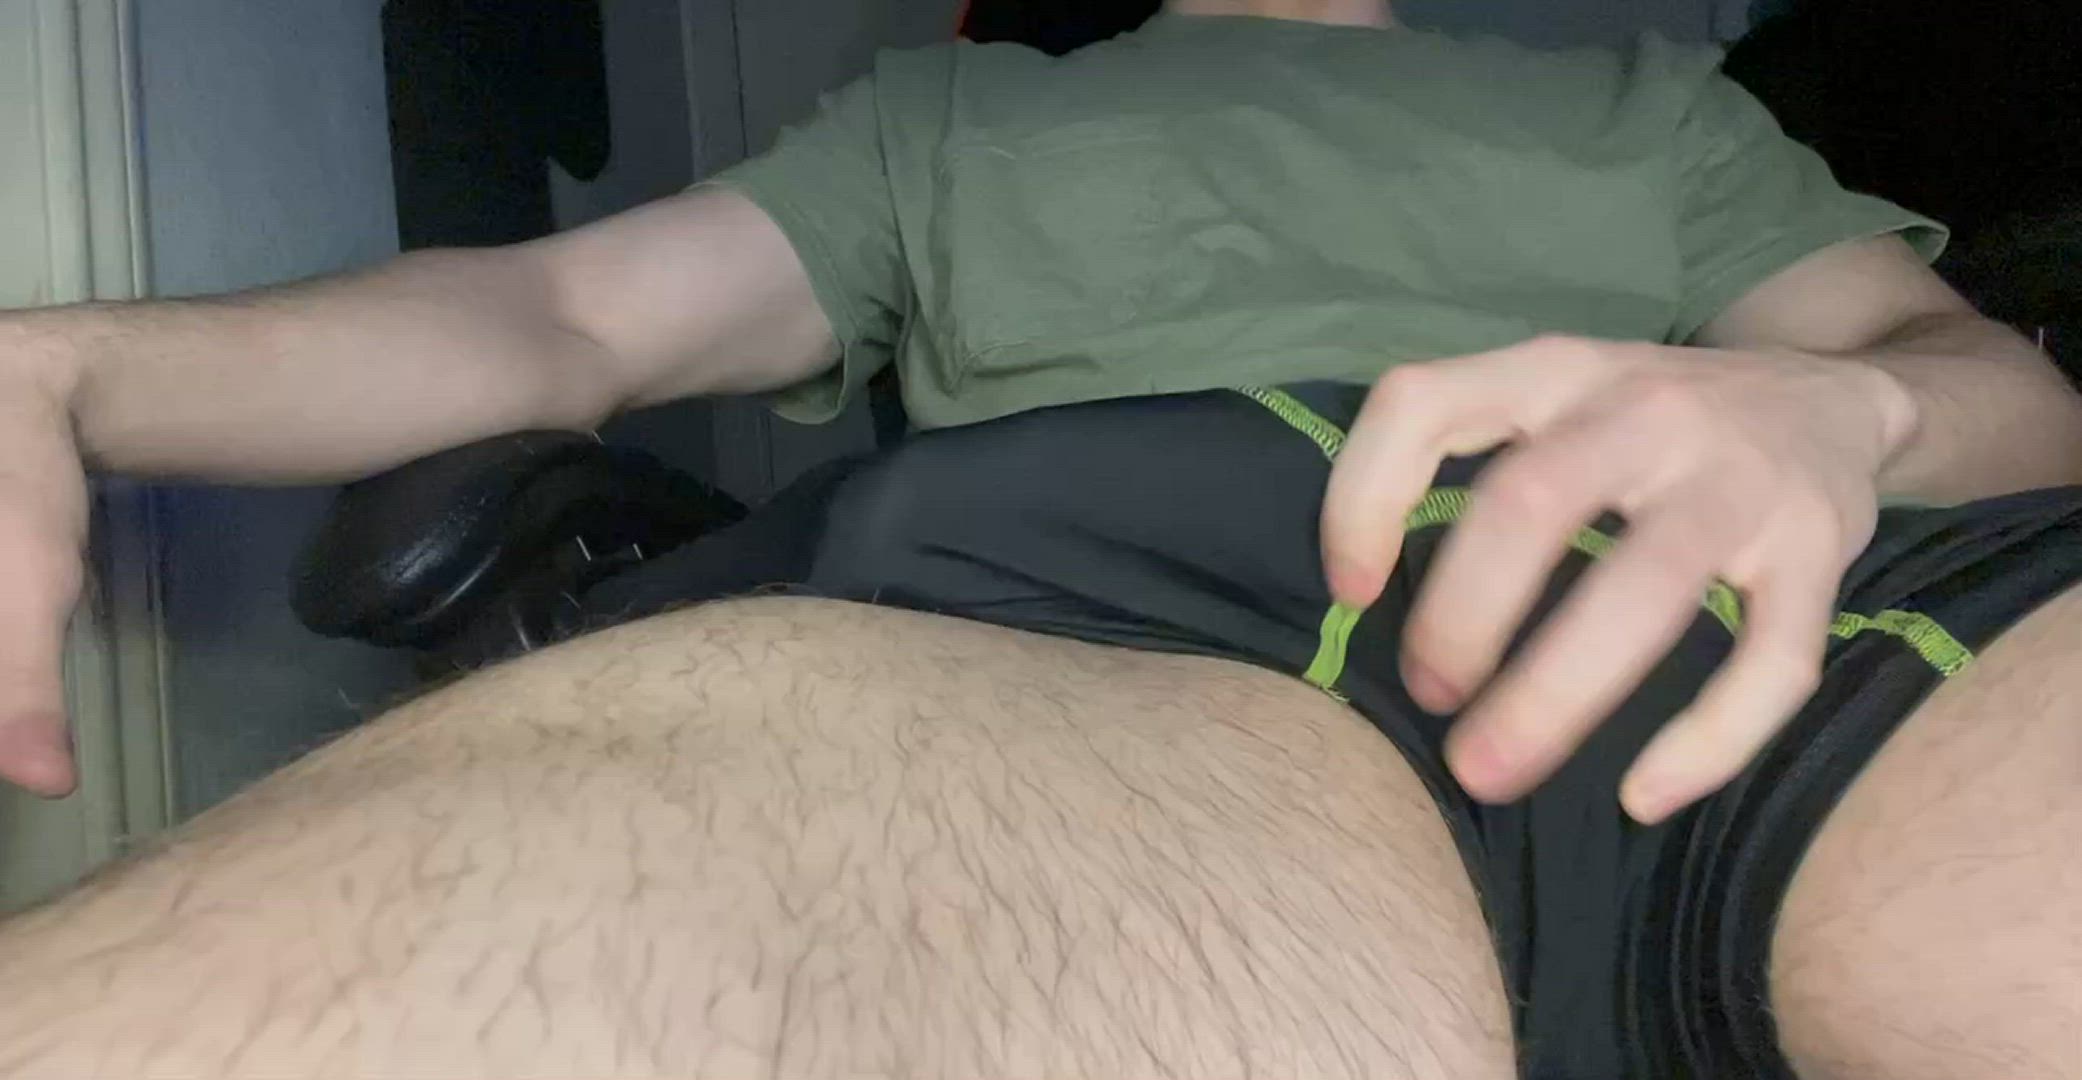 Big Dick porn video with onlyfans model hungaesthetics <strong>@randomreal118</strong>